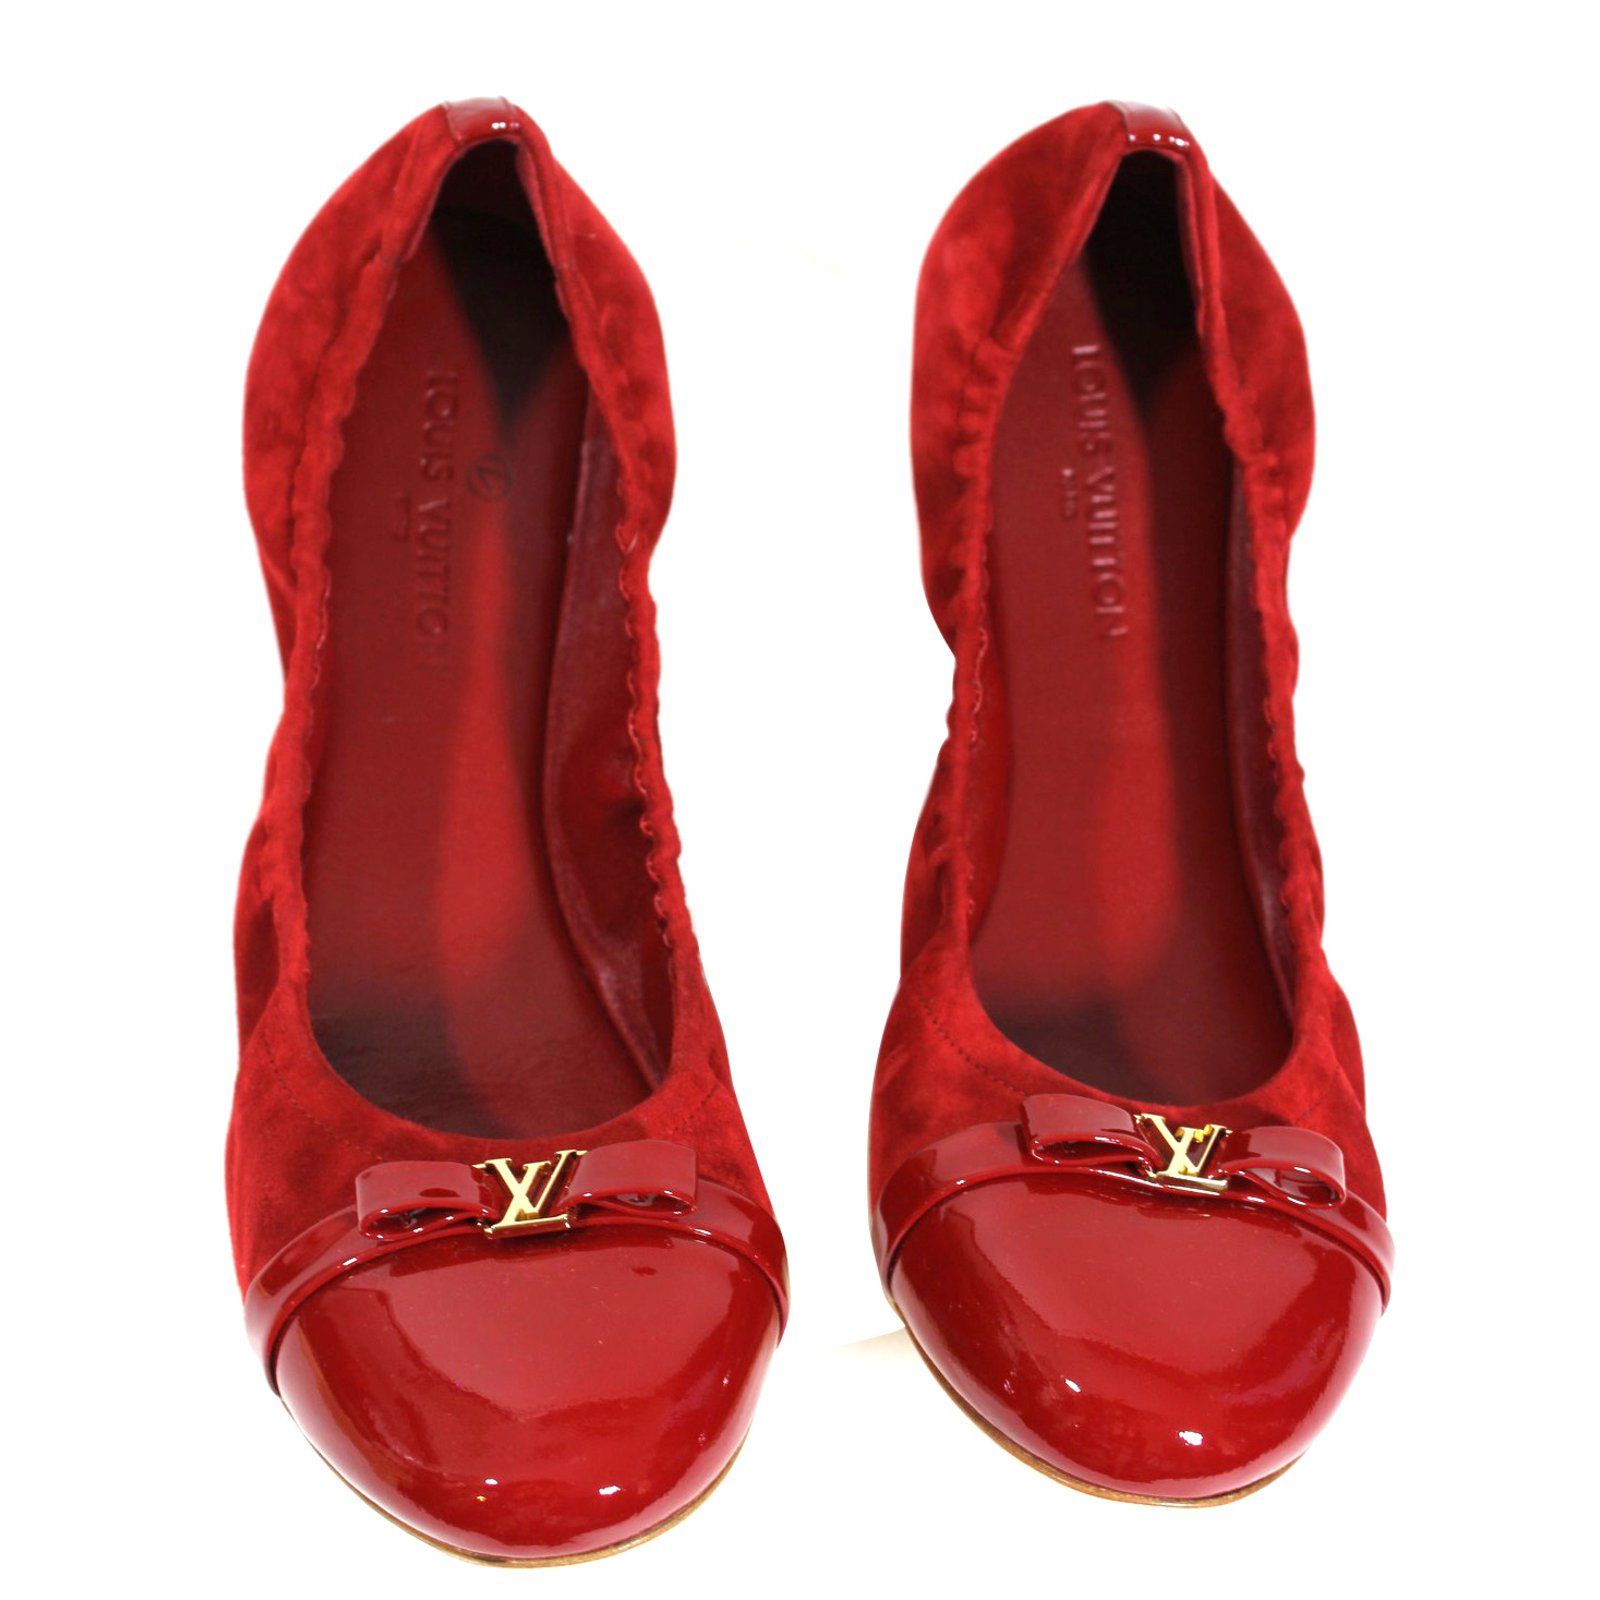 red suede flats